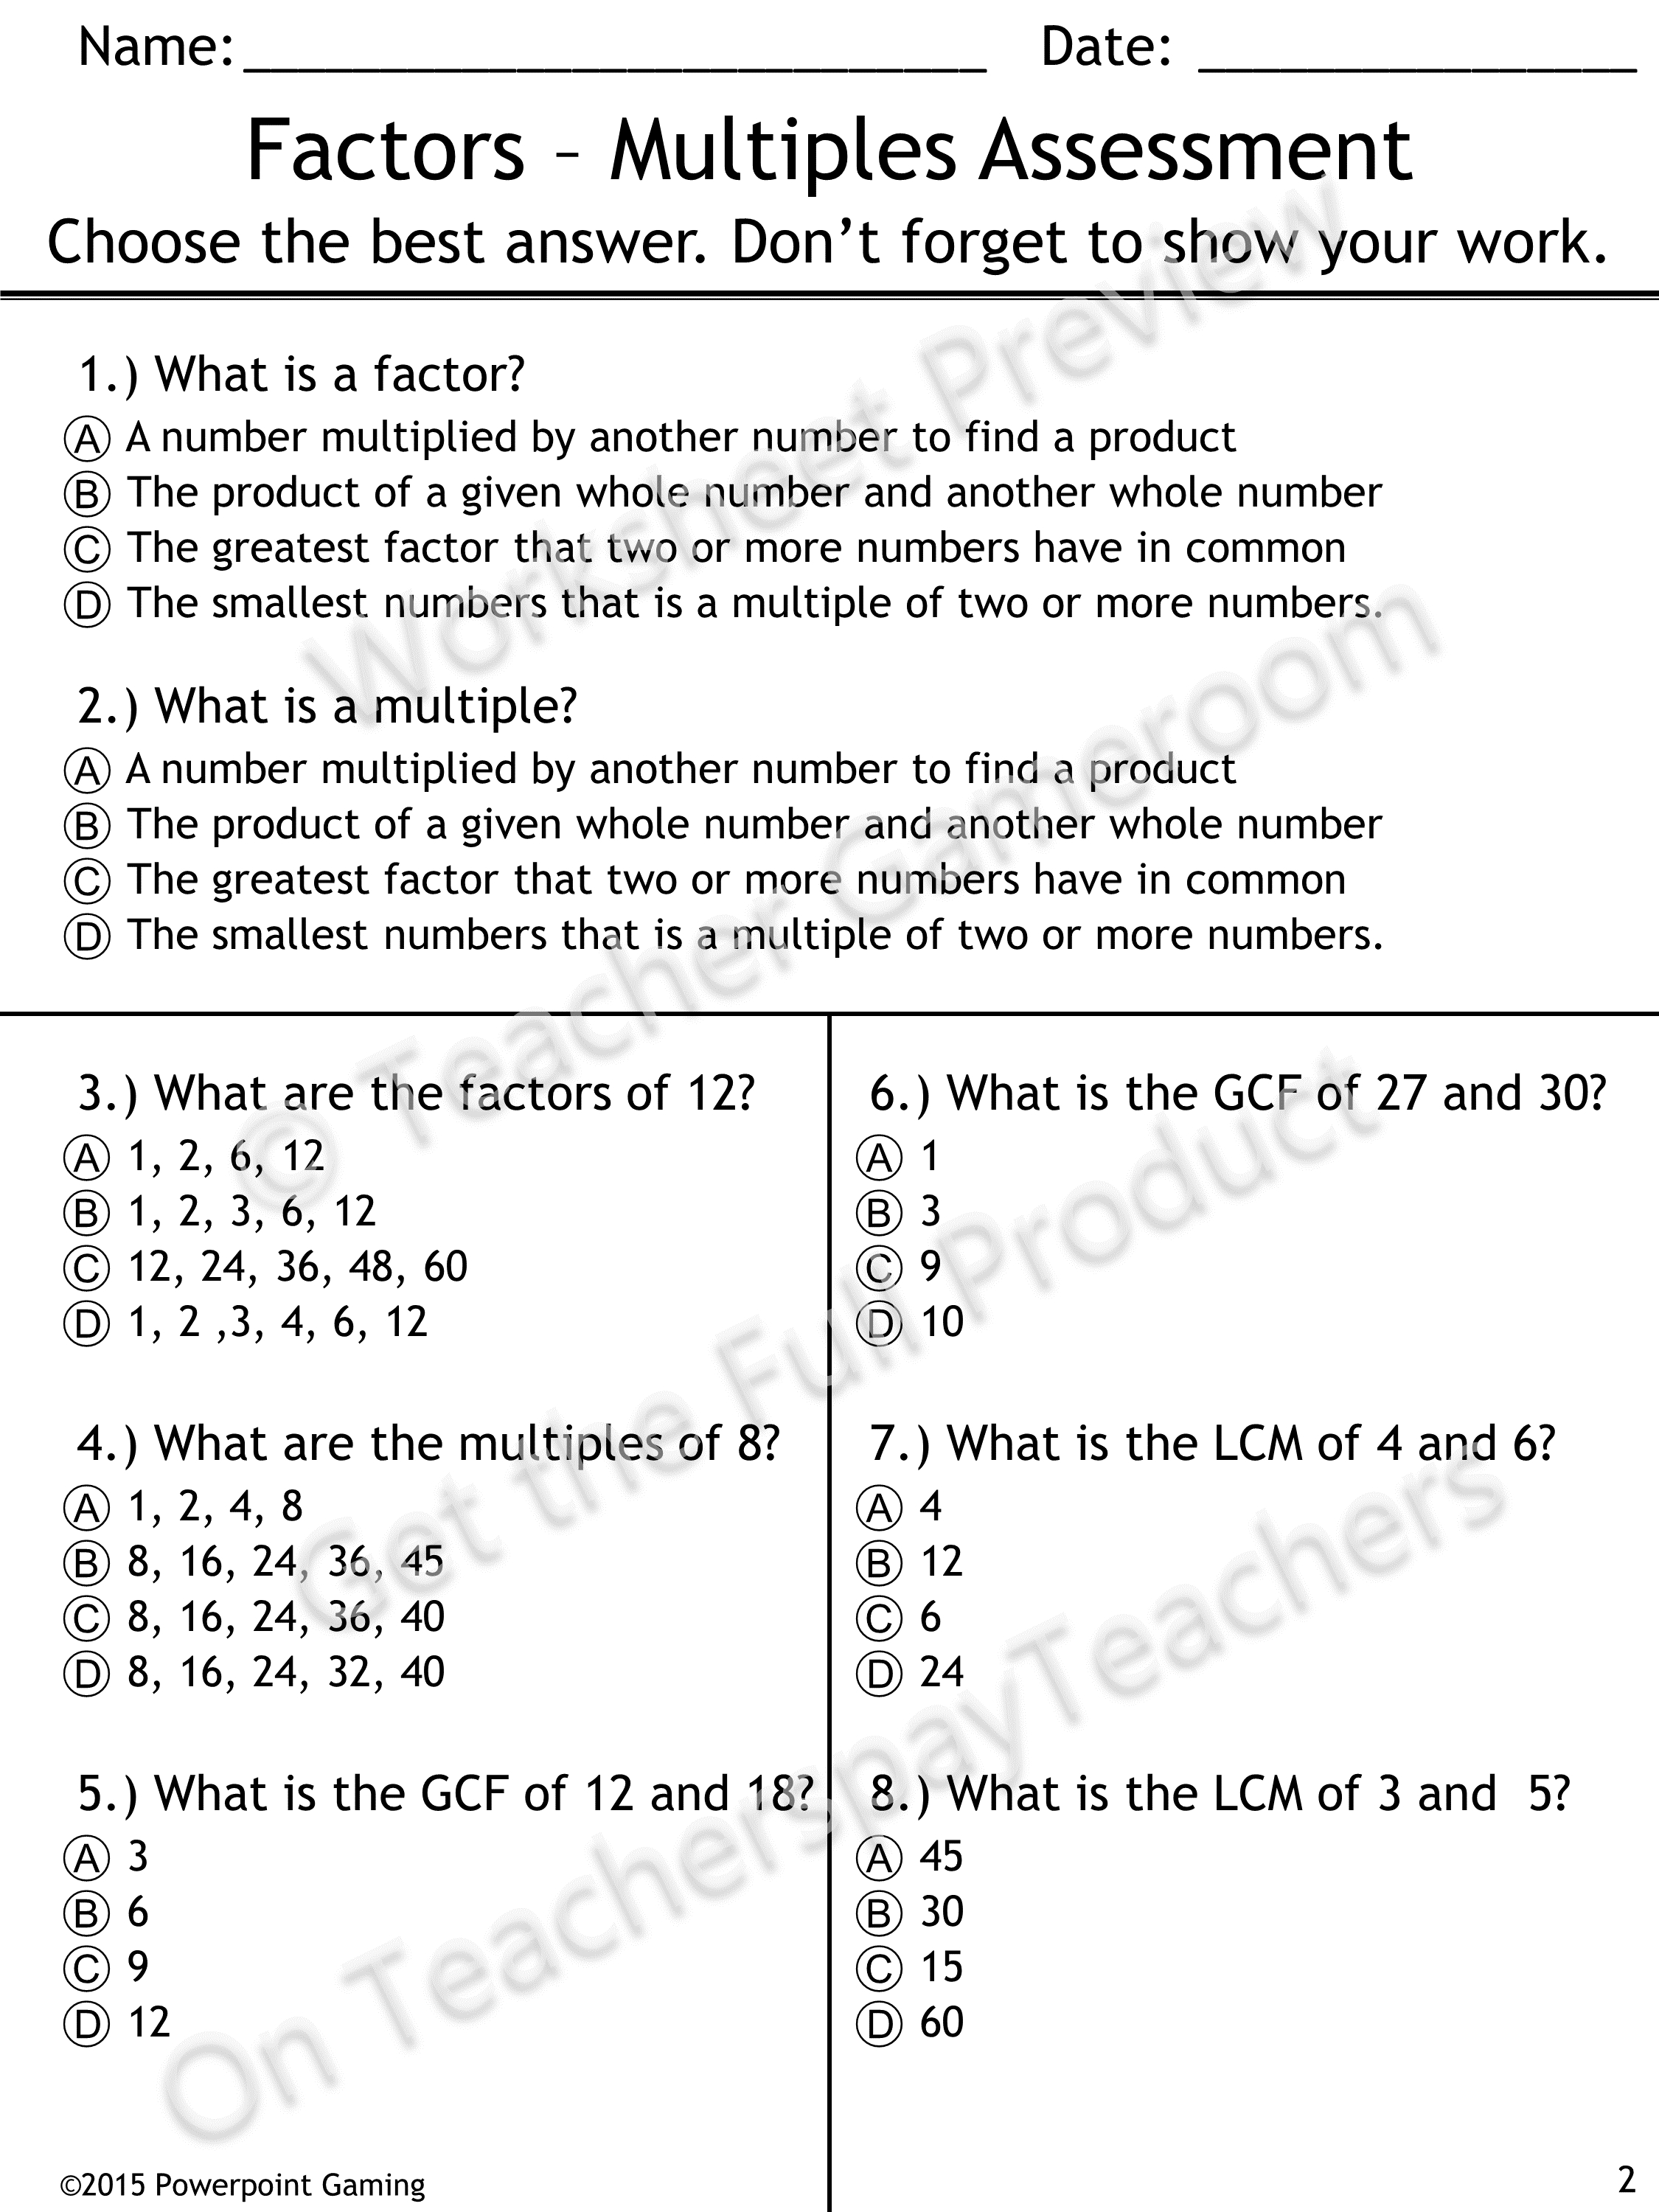 4th-grade-math-practice-multiples-factors-and-inequalities